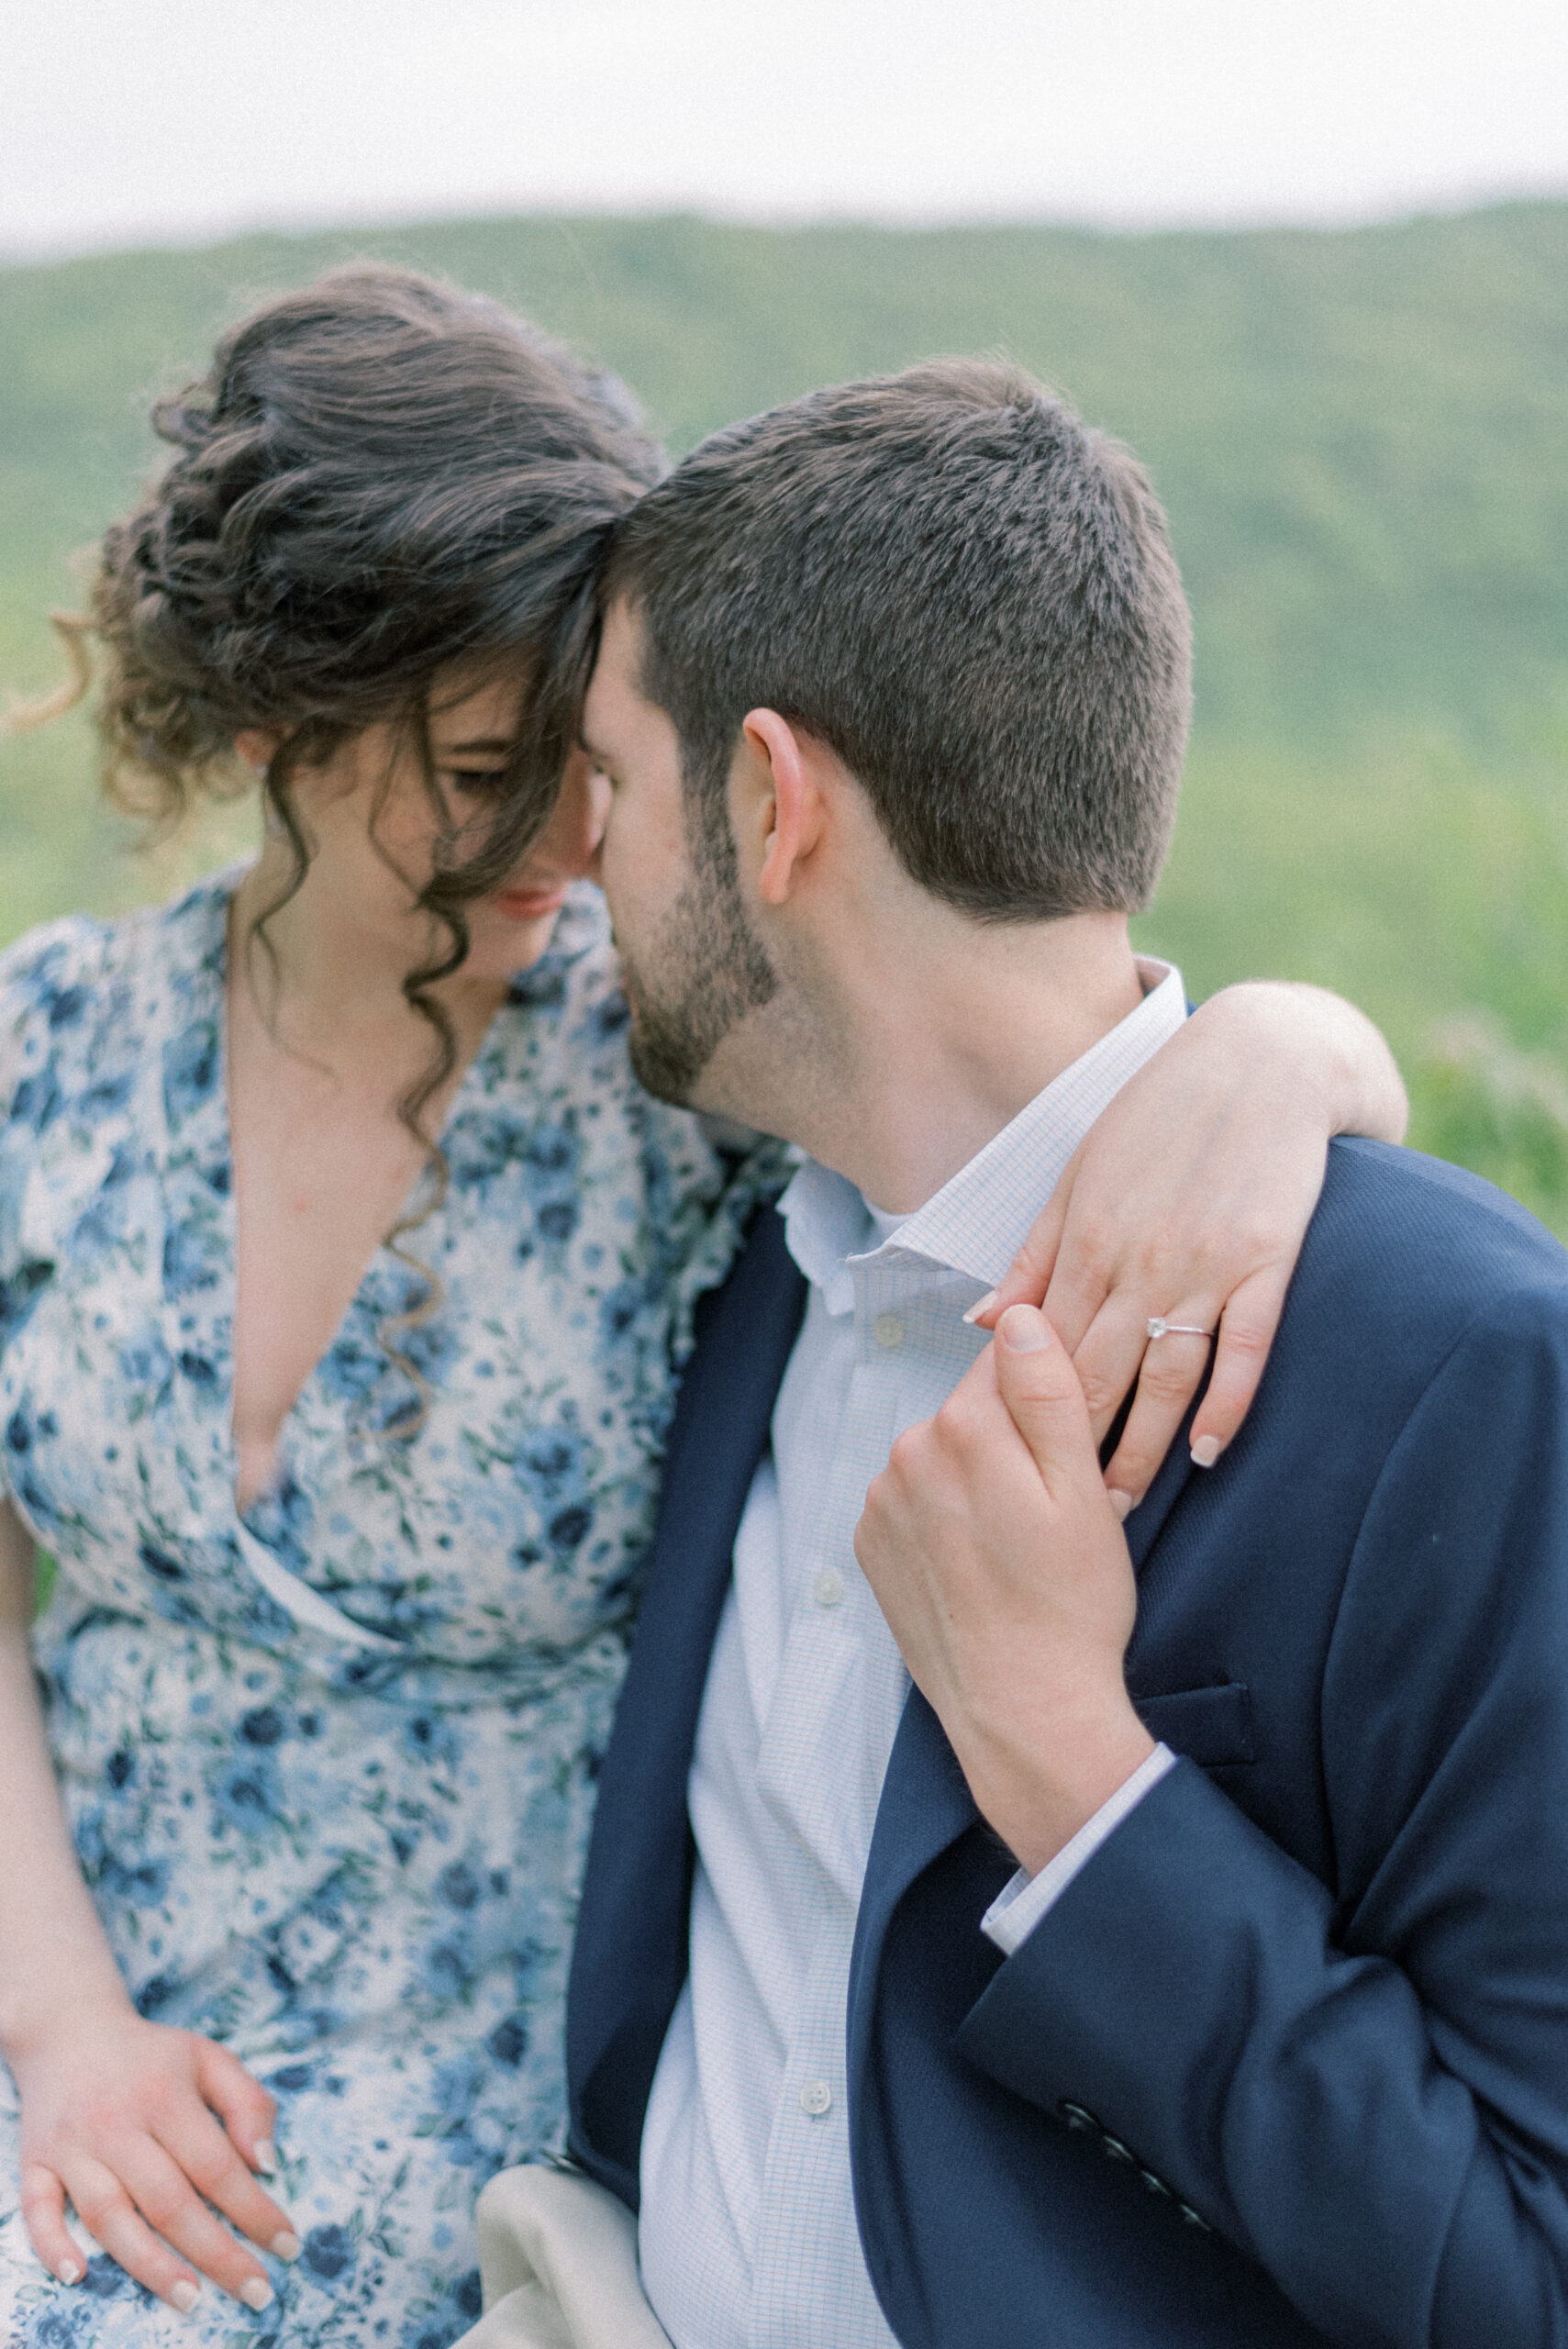 Maryland wedding photographer captures couple pressing foreheads together during portraits